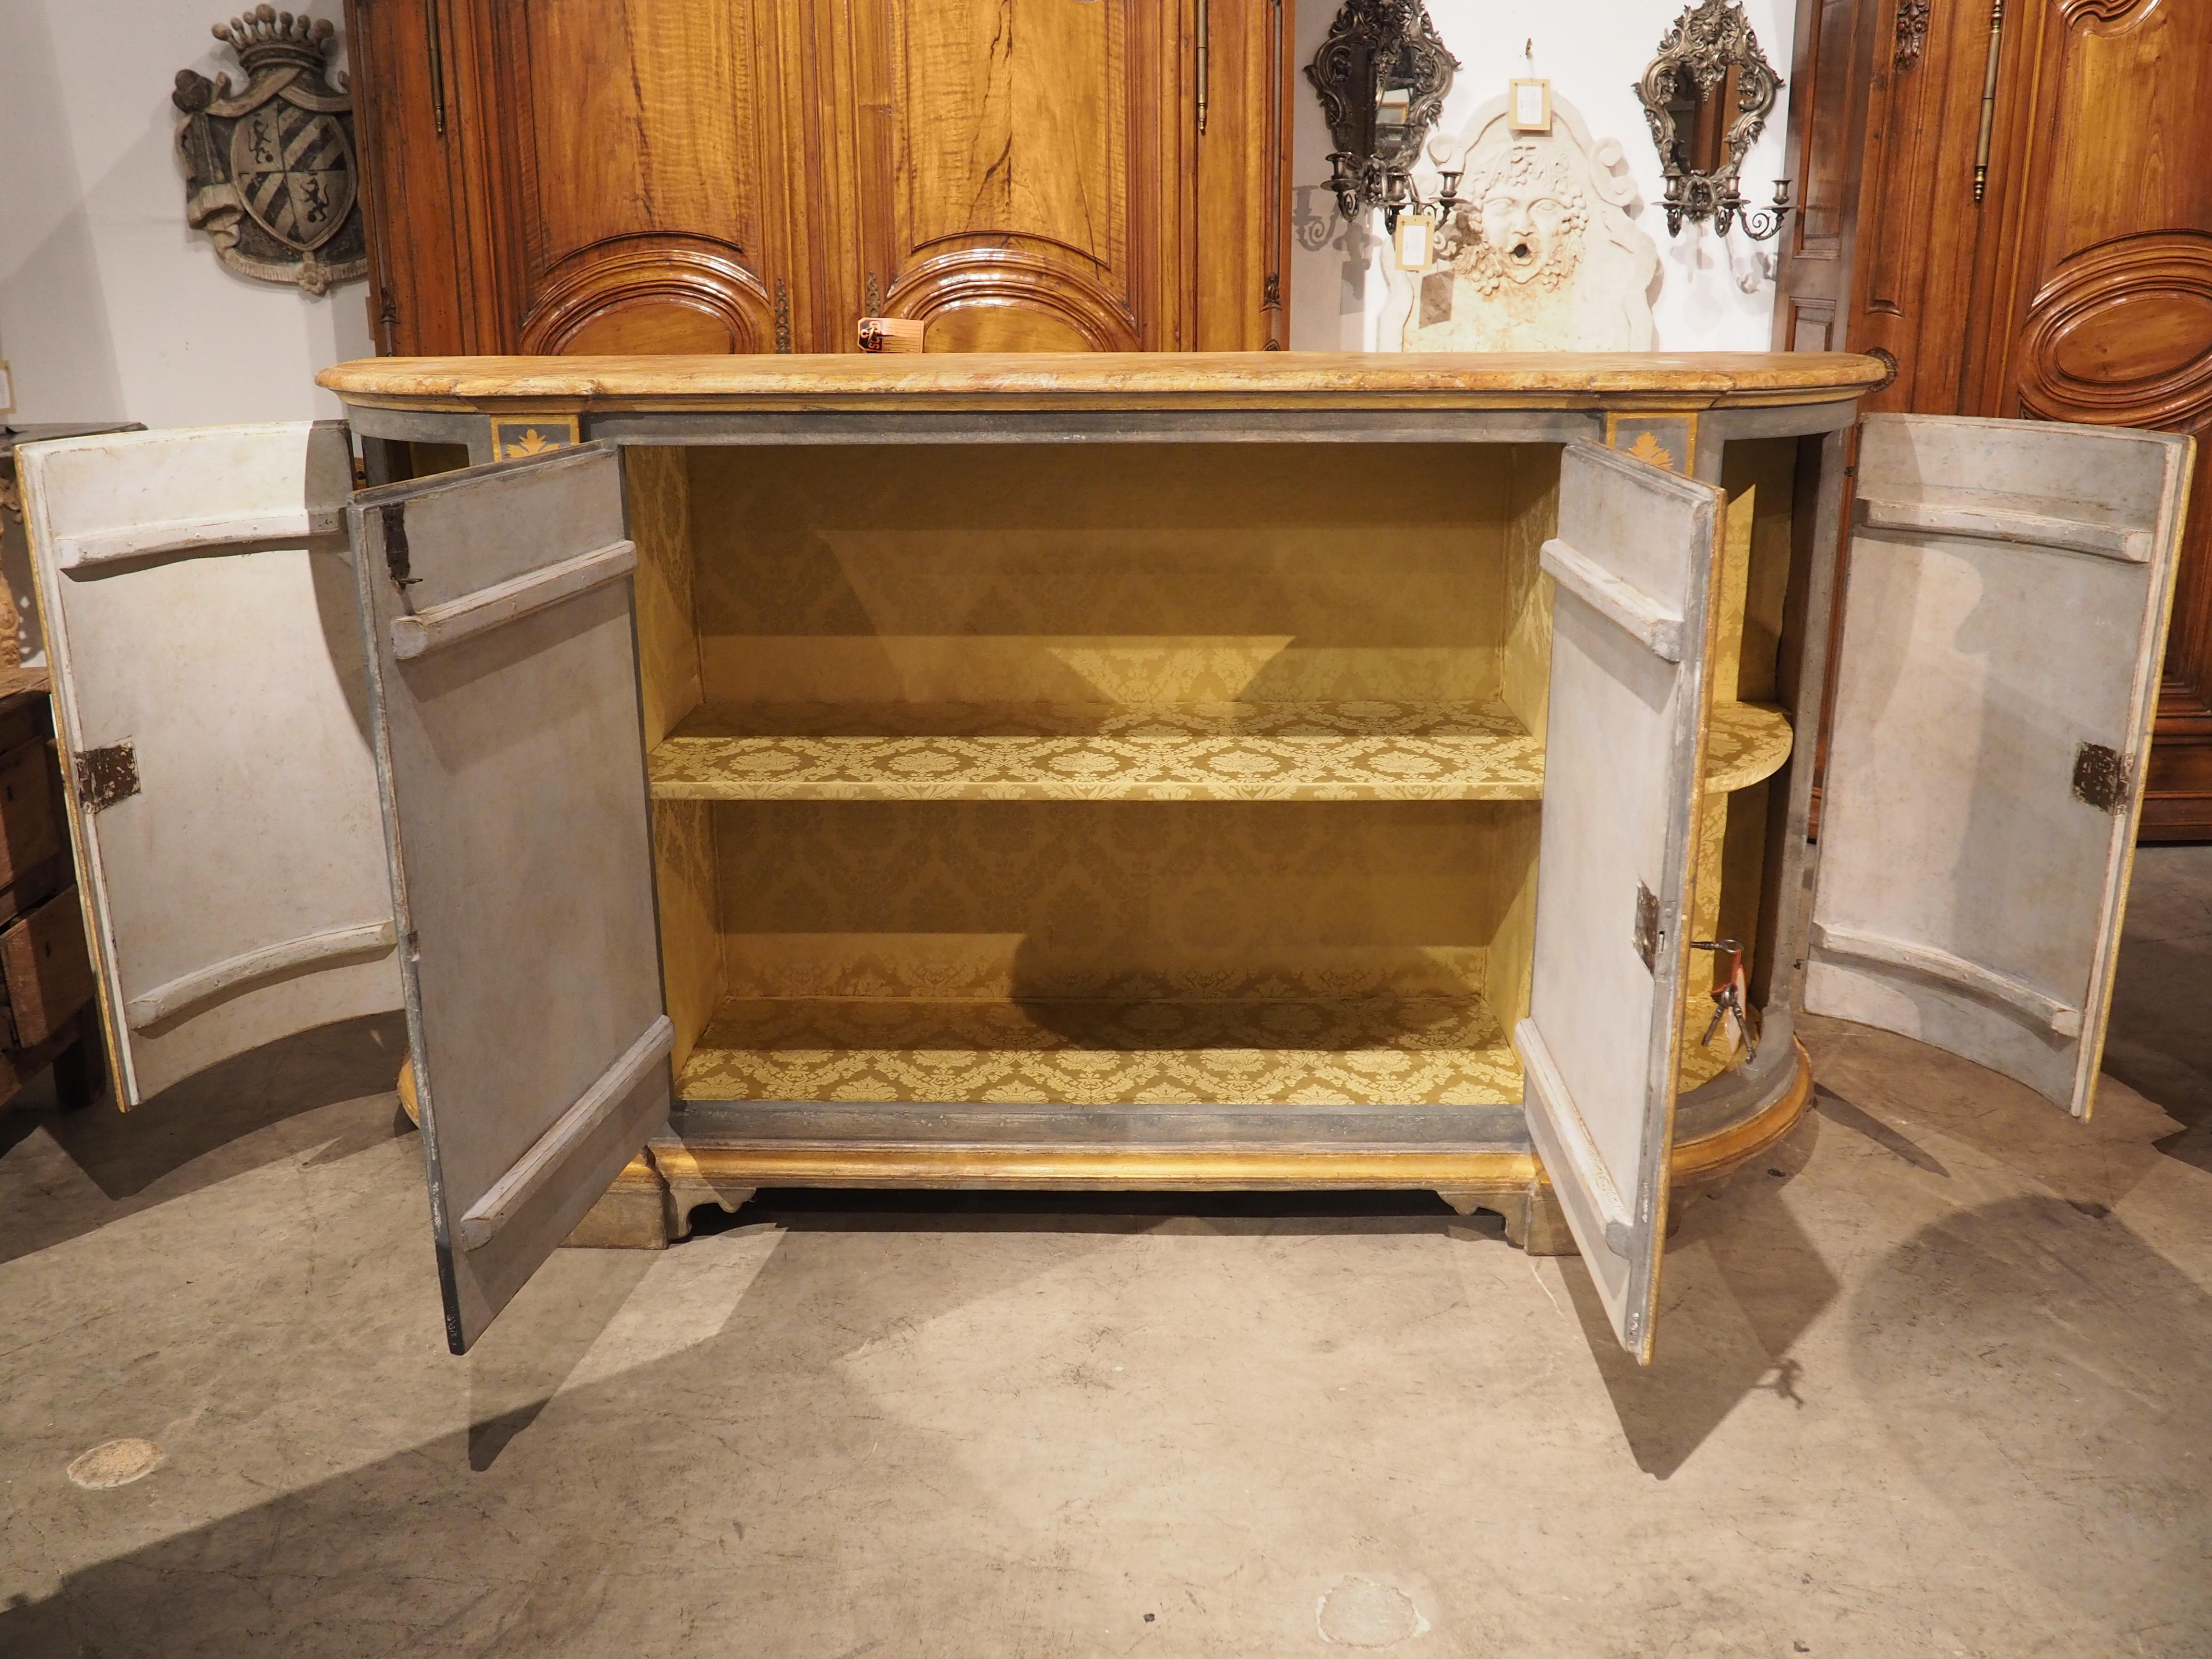 19th Century 4-Door Powder Blue and Gold Painted Credenza from Italy For Sale 10